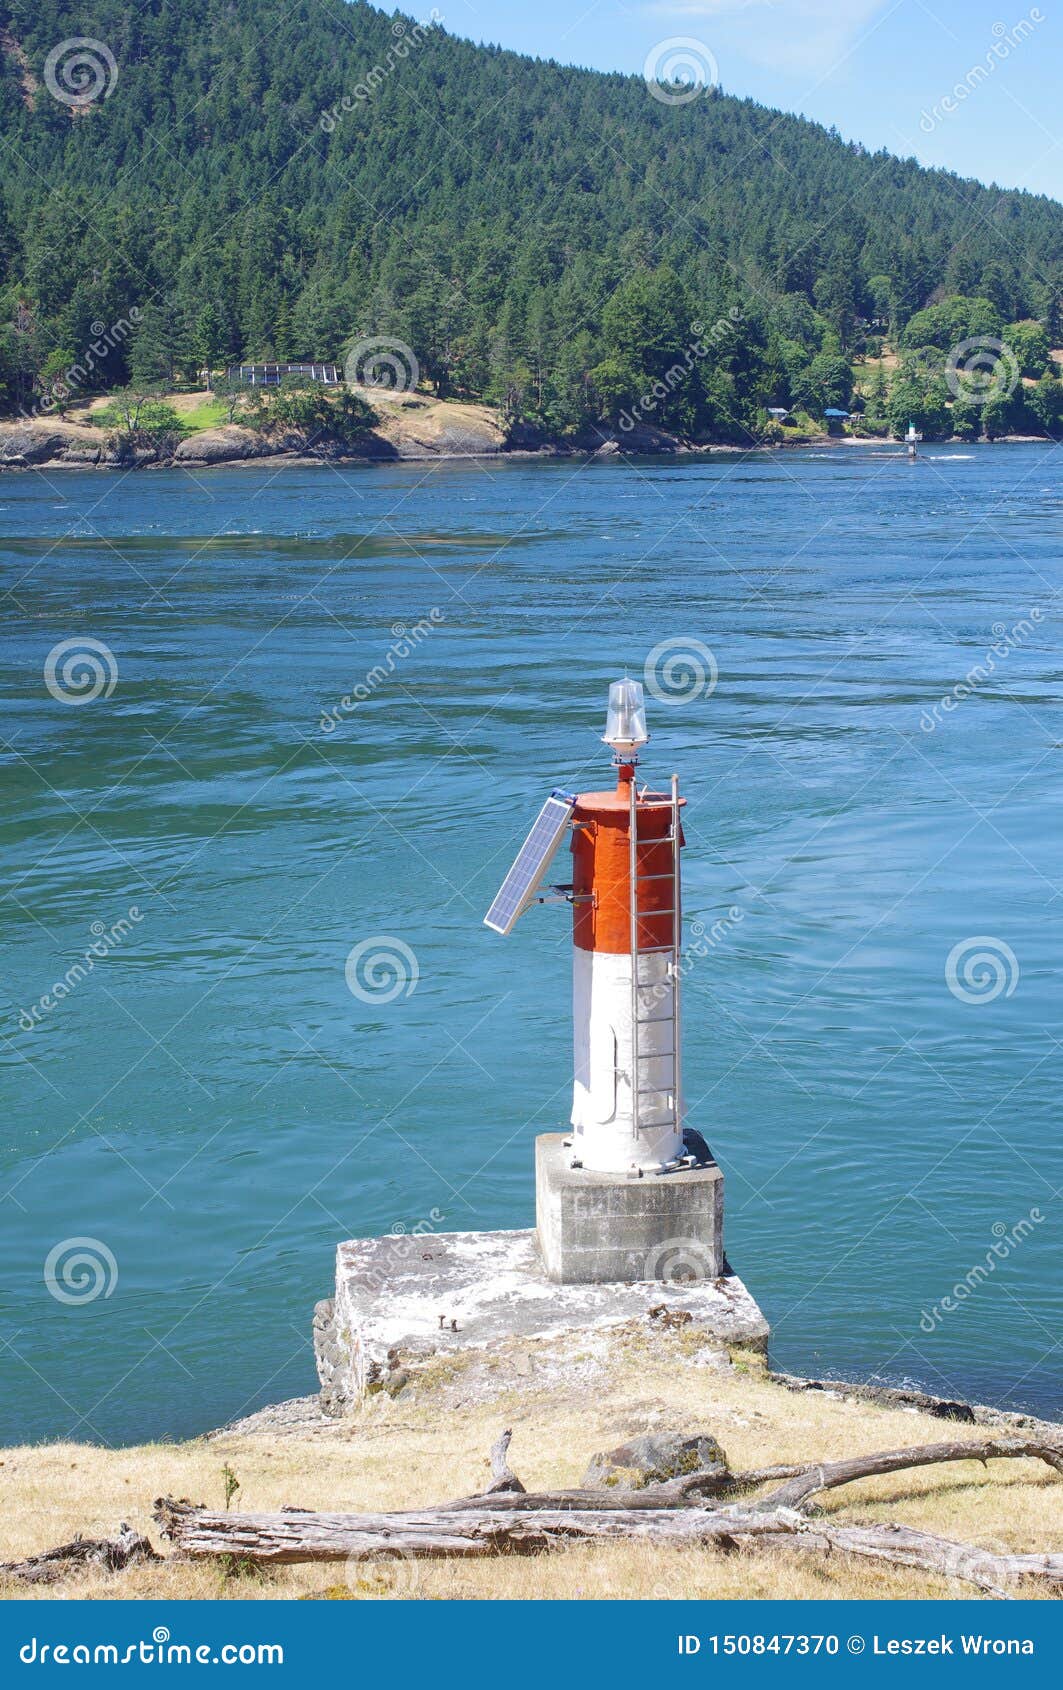 marine navigation lights powered by photoelectric cells